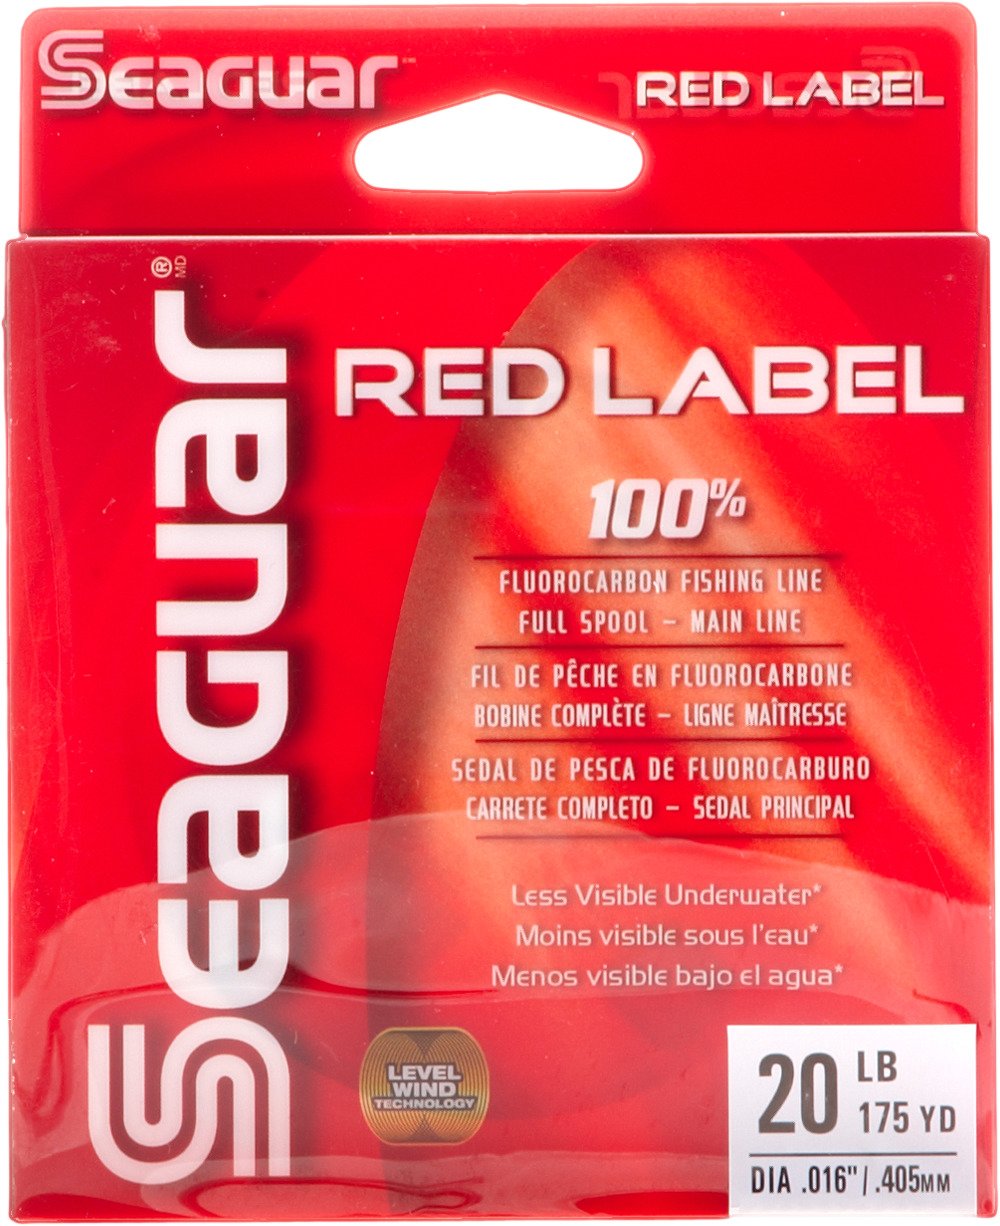 NEW Seaguar Red Label 100% Fluorocarbon 175 Yard Fishing Line 20 Pound 20RM175 